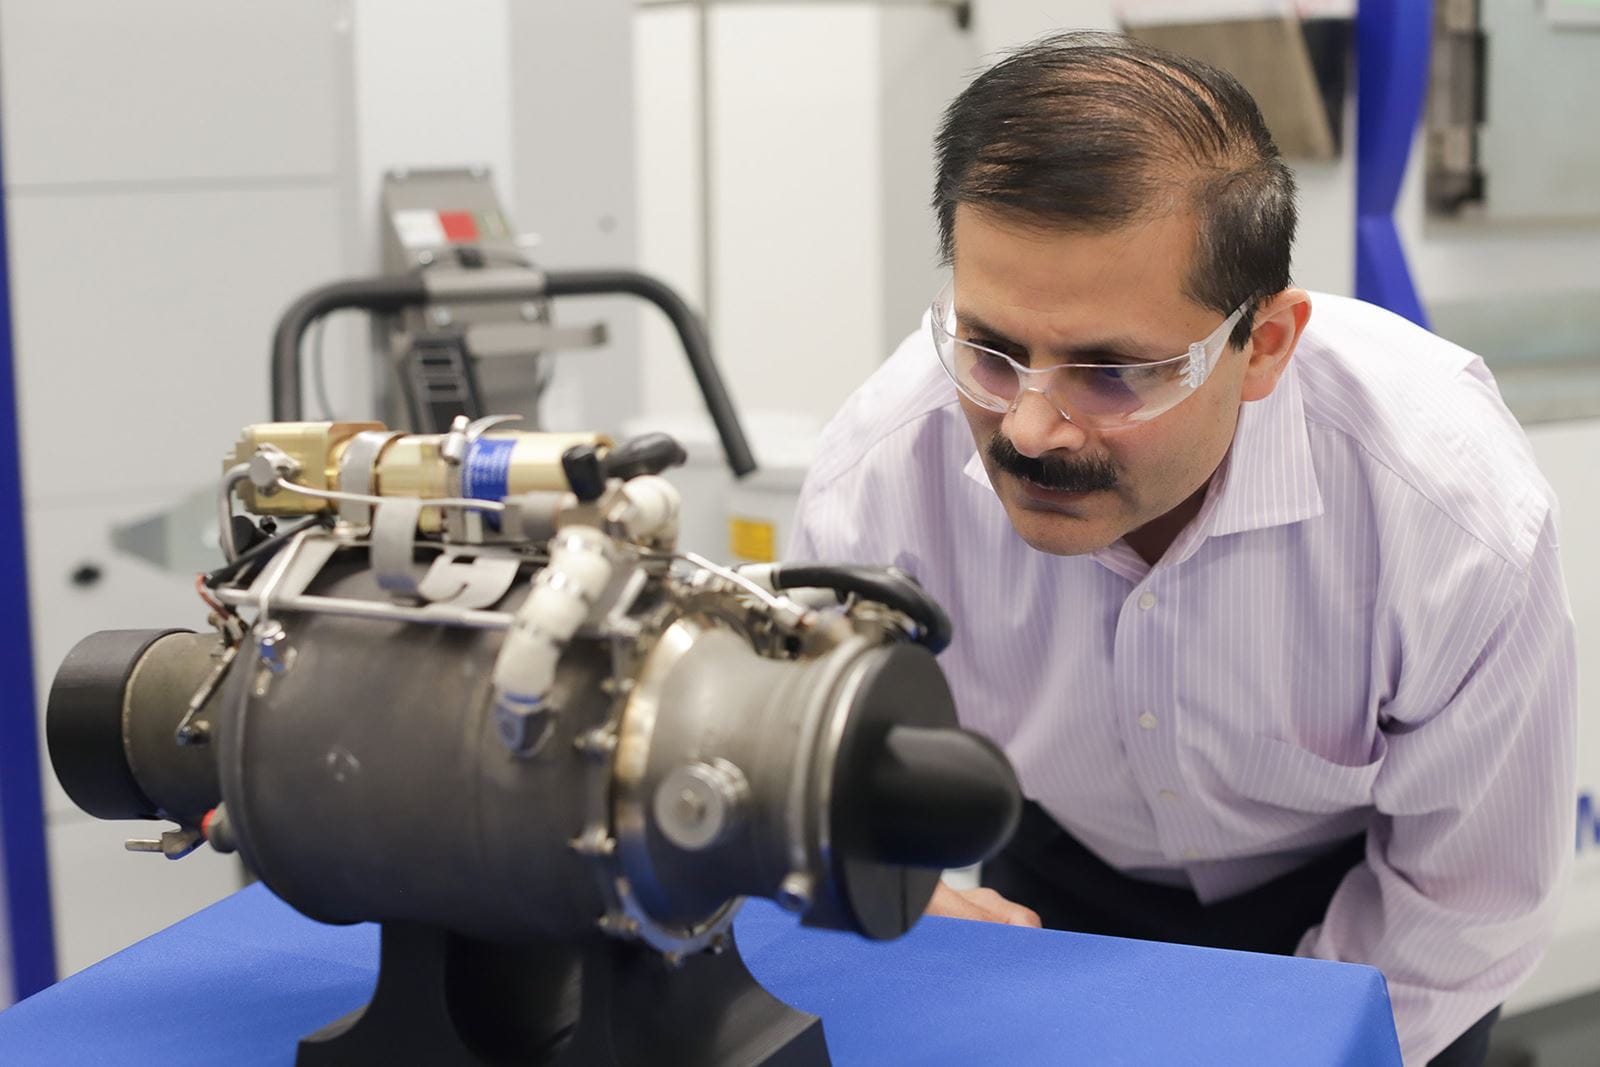 Venkat Vedula, executive director of the Raytheon Technologies Additive Manufacturing Process and Capability Center, examines a small turbojet engine with a 3D printed main body